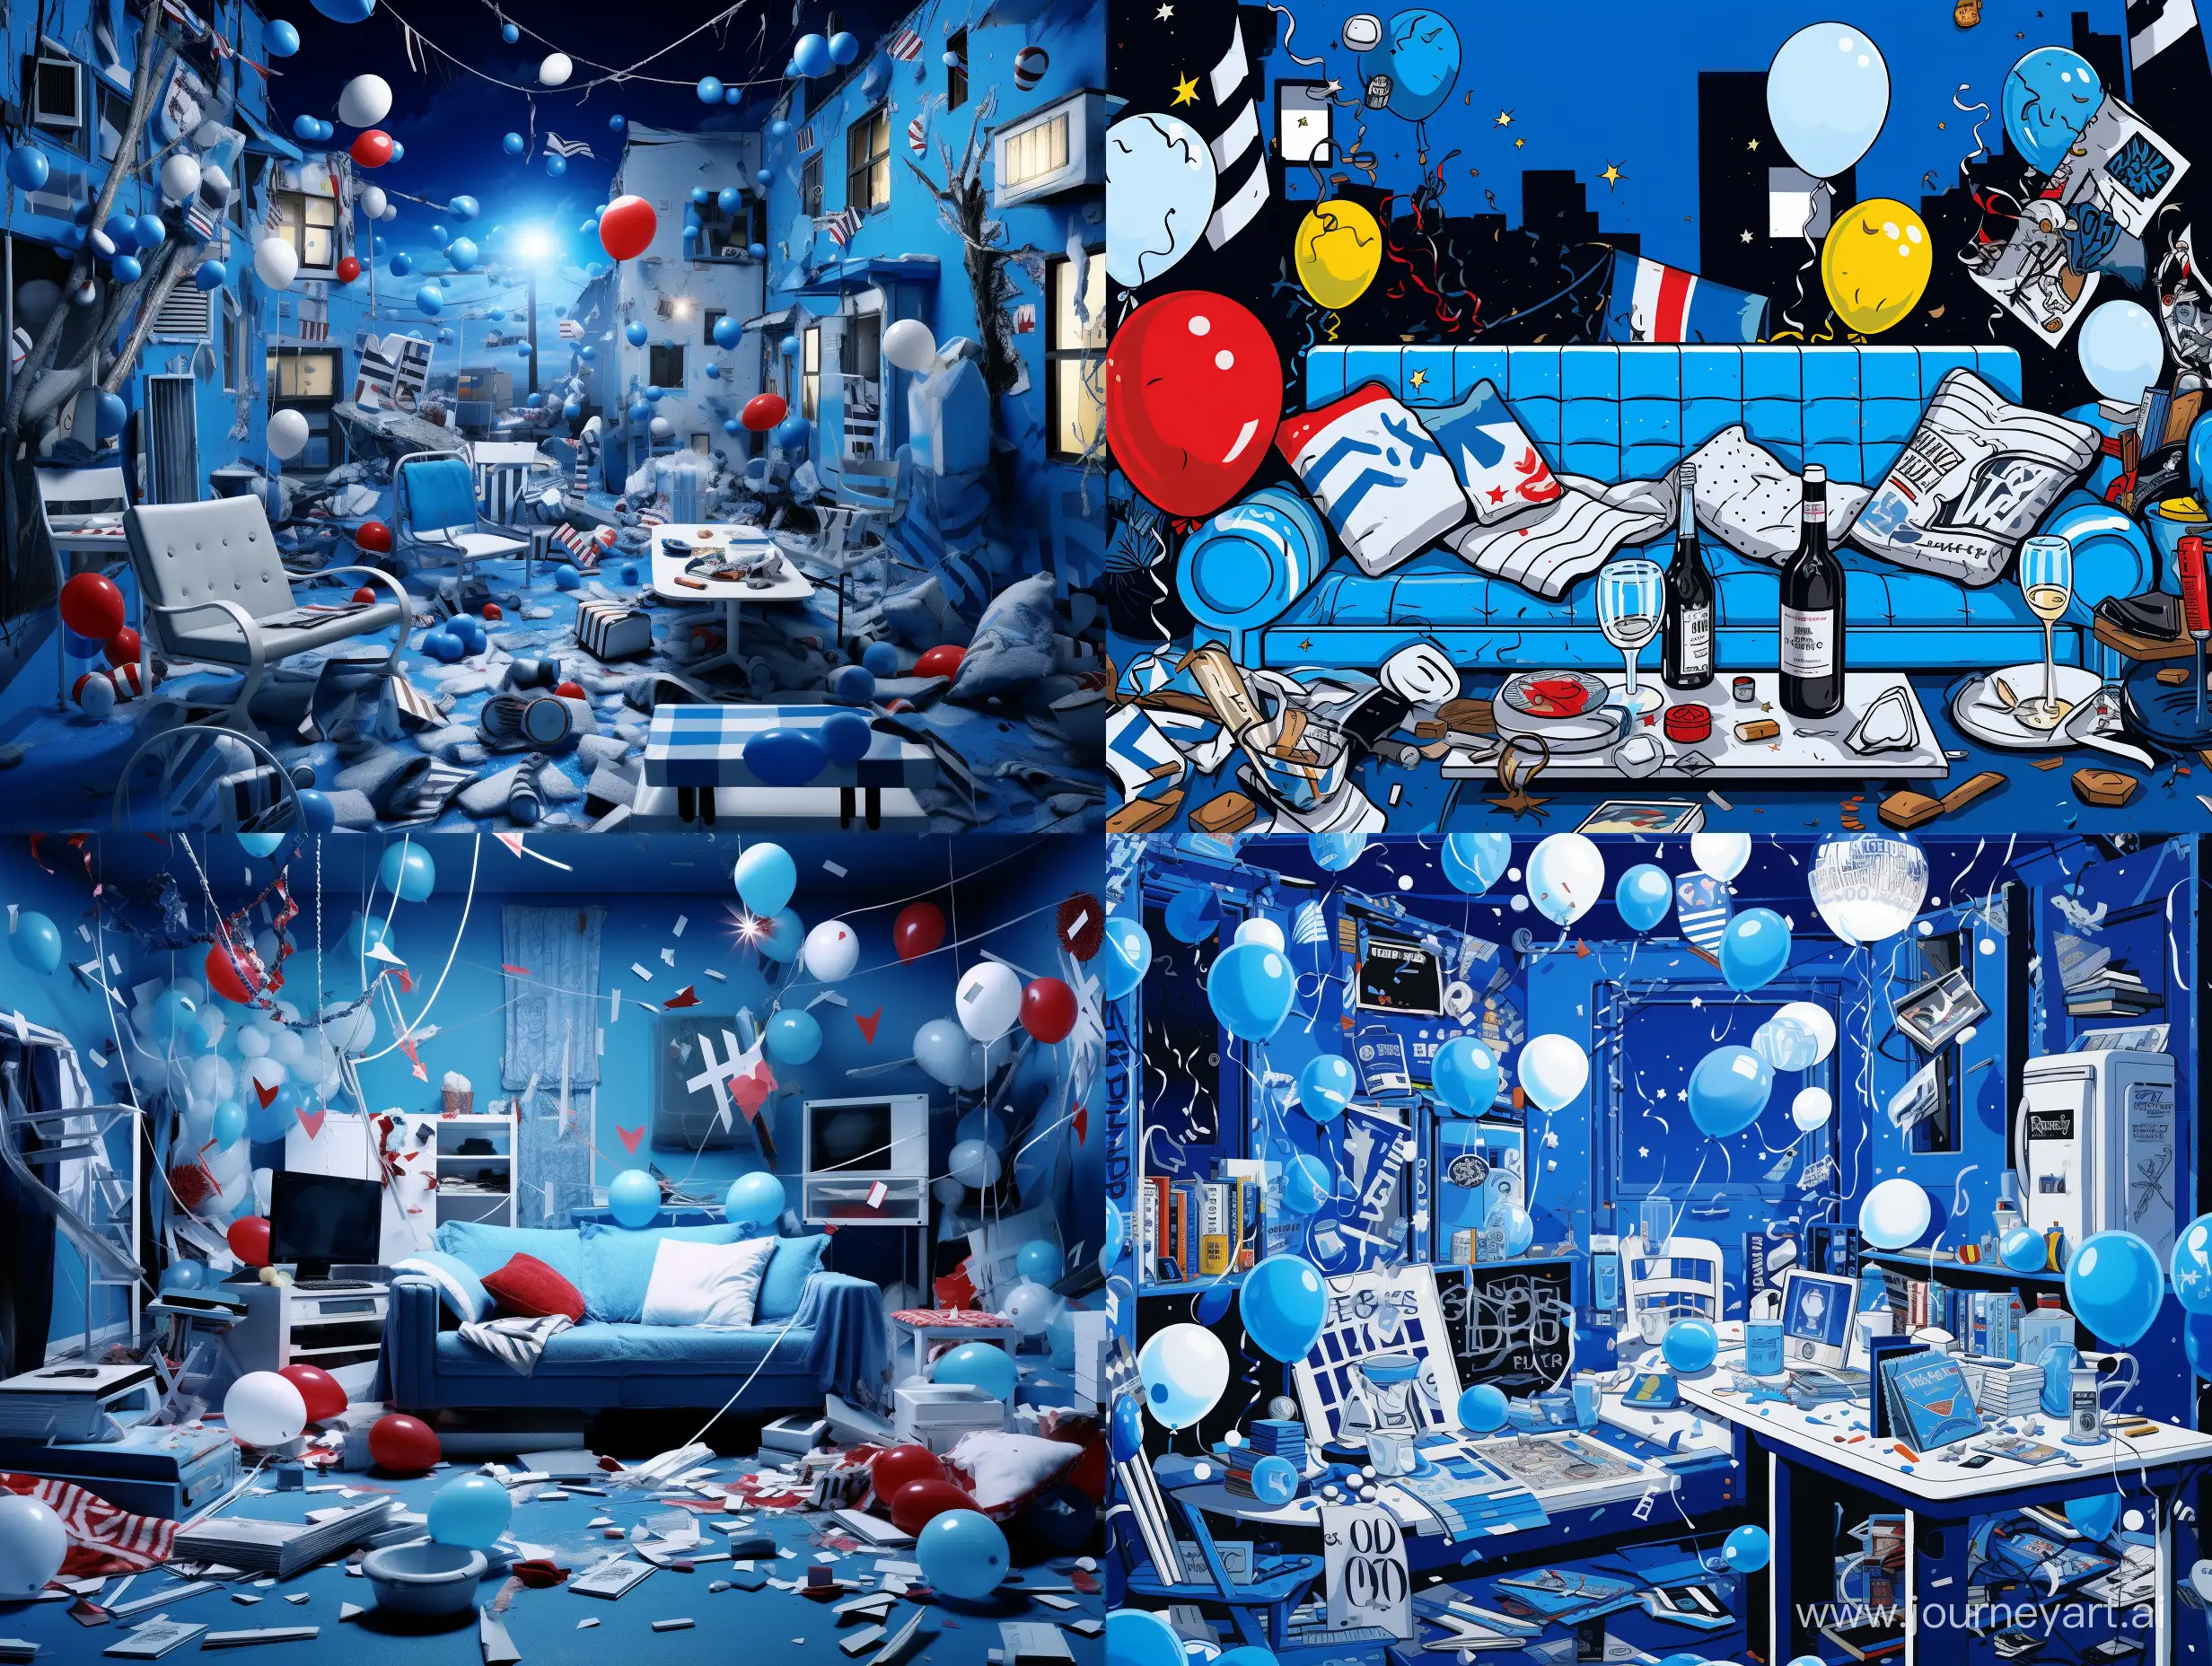 Lawlessness-90s-Night-Student-Party-with-Scattered-Items-on-White-and-Blue-Background